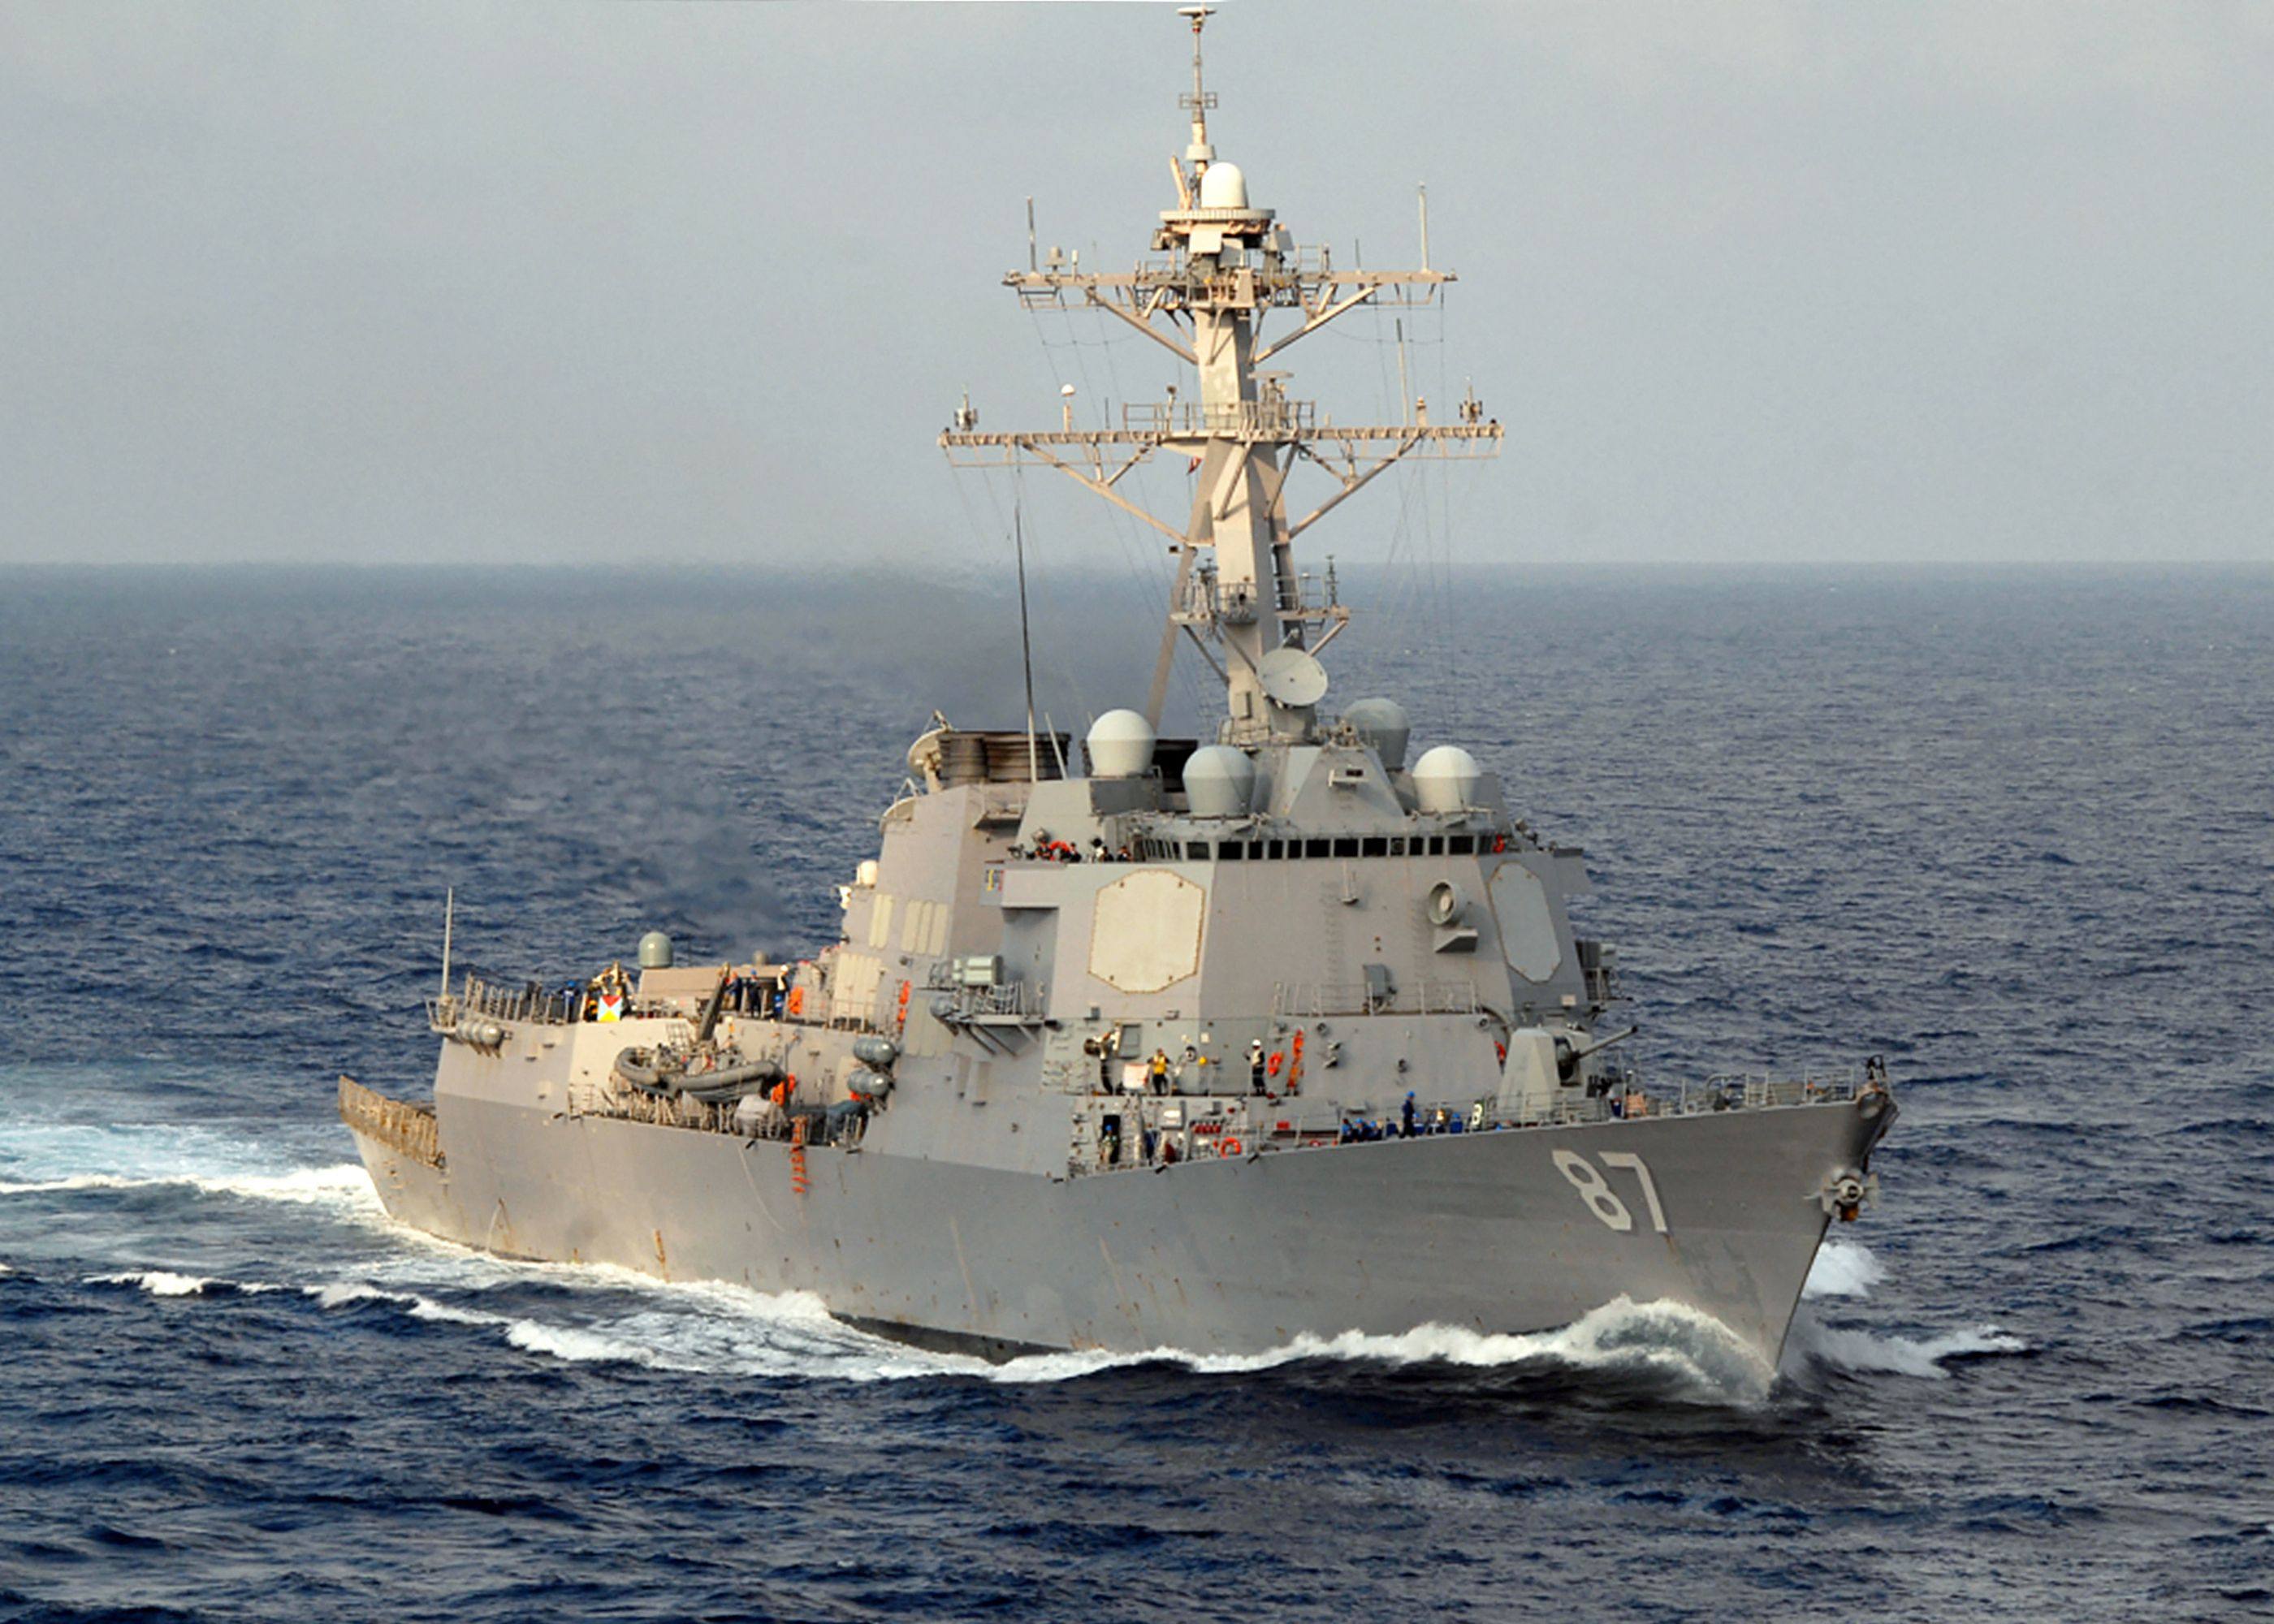 The US military said it seized Iranian-made missile parts en route to Huthi rebels from a boat in the Arabian Sea, the first such operation since the start of Huthi attacks against commercial ships last year. Photo: US Navy Visual News Service/AFP